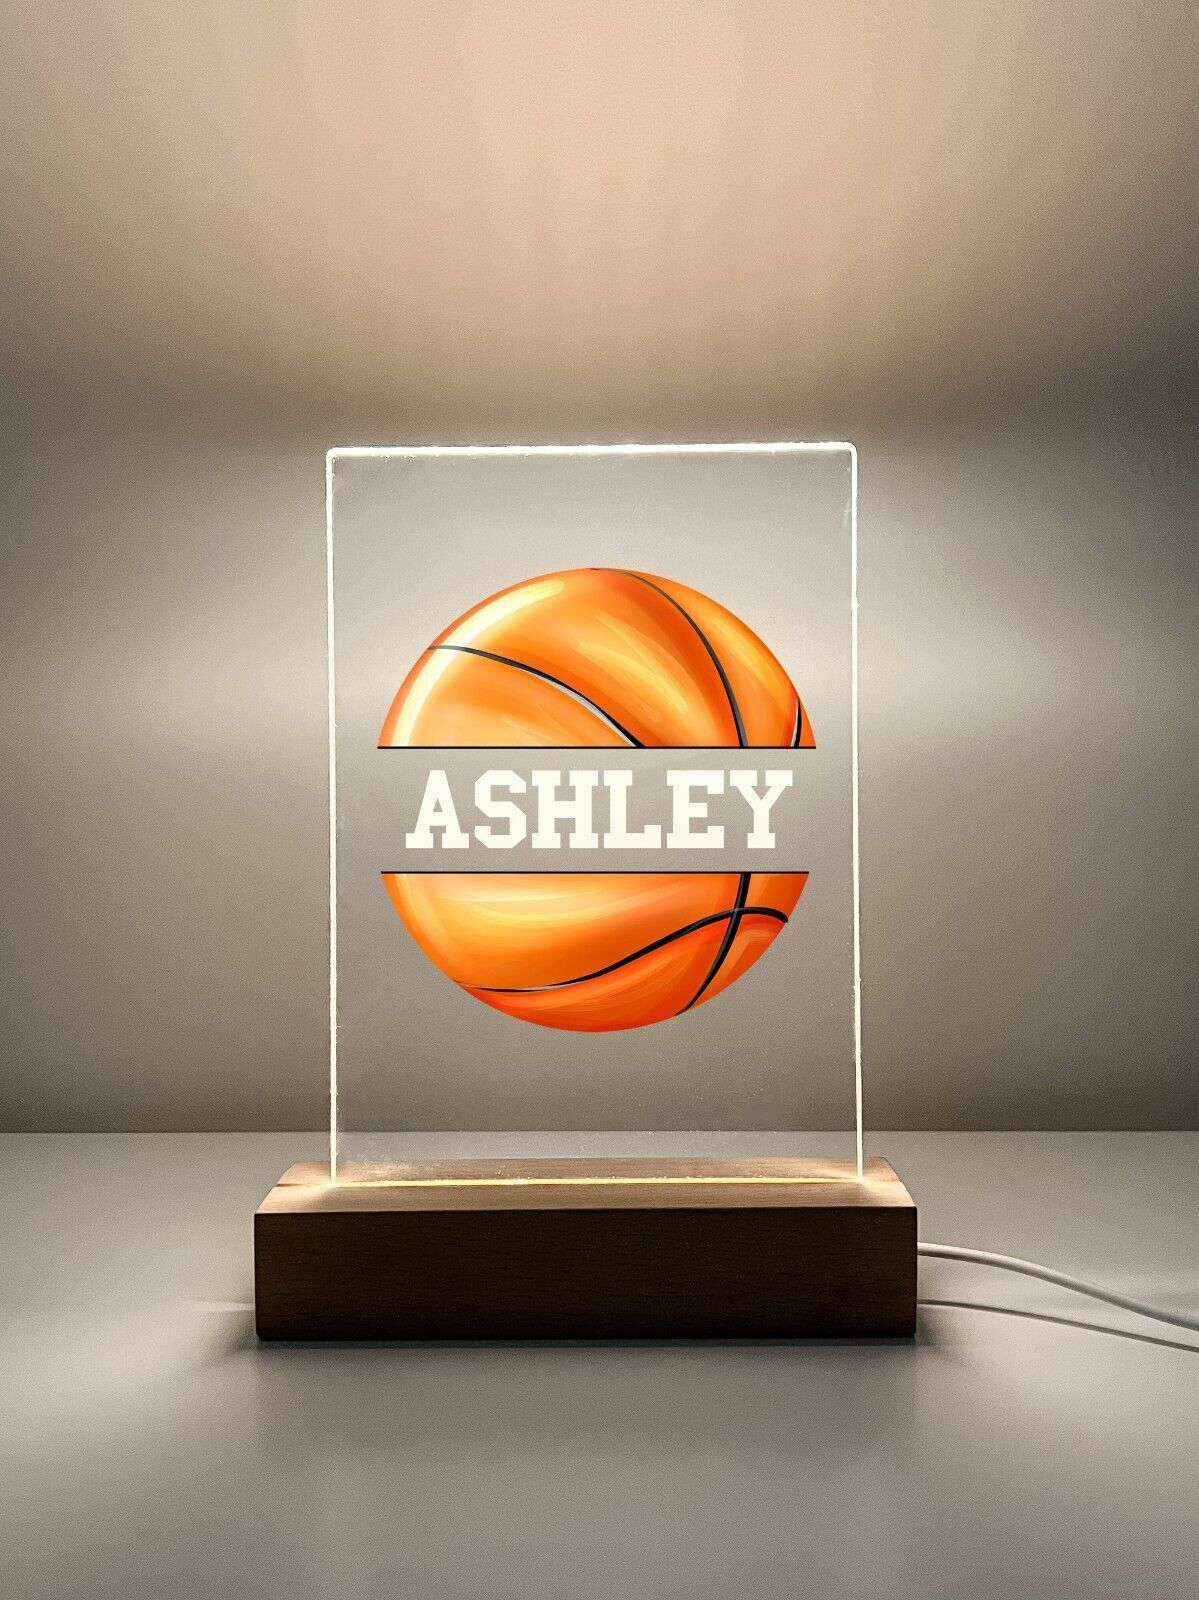 Personalized Name LED Light Up Wood Lamp Stand Sports Basketball Team Player Fan